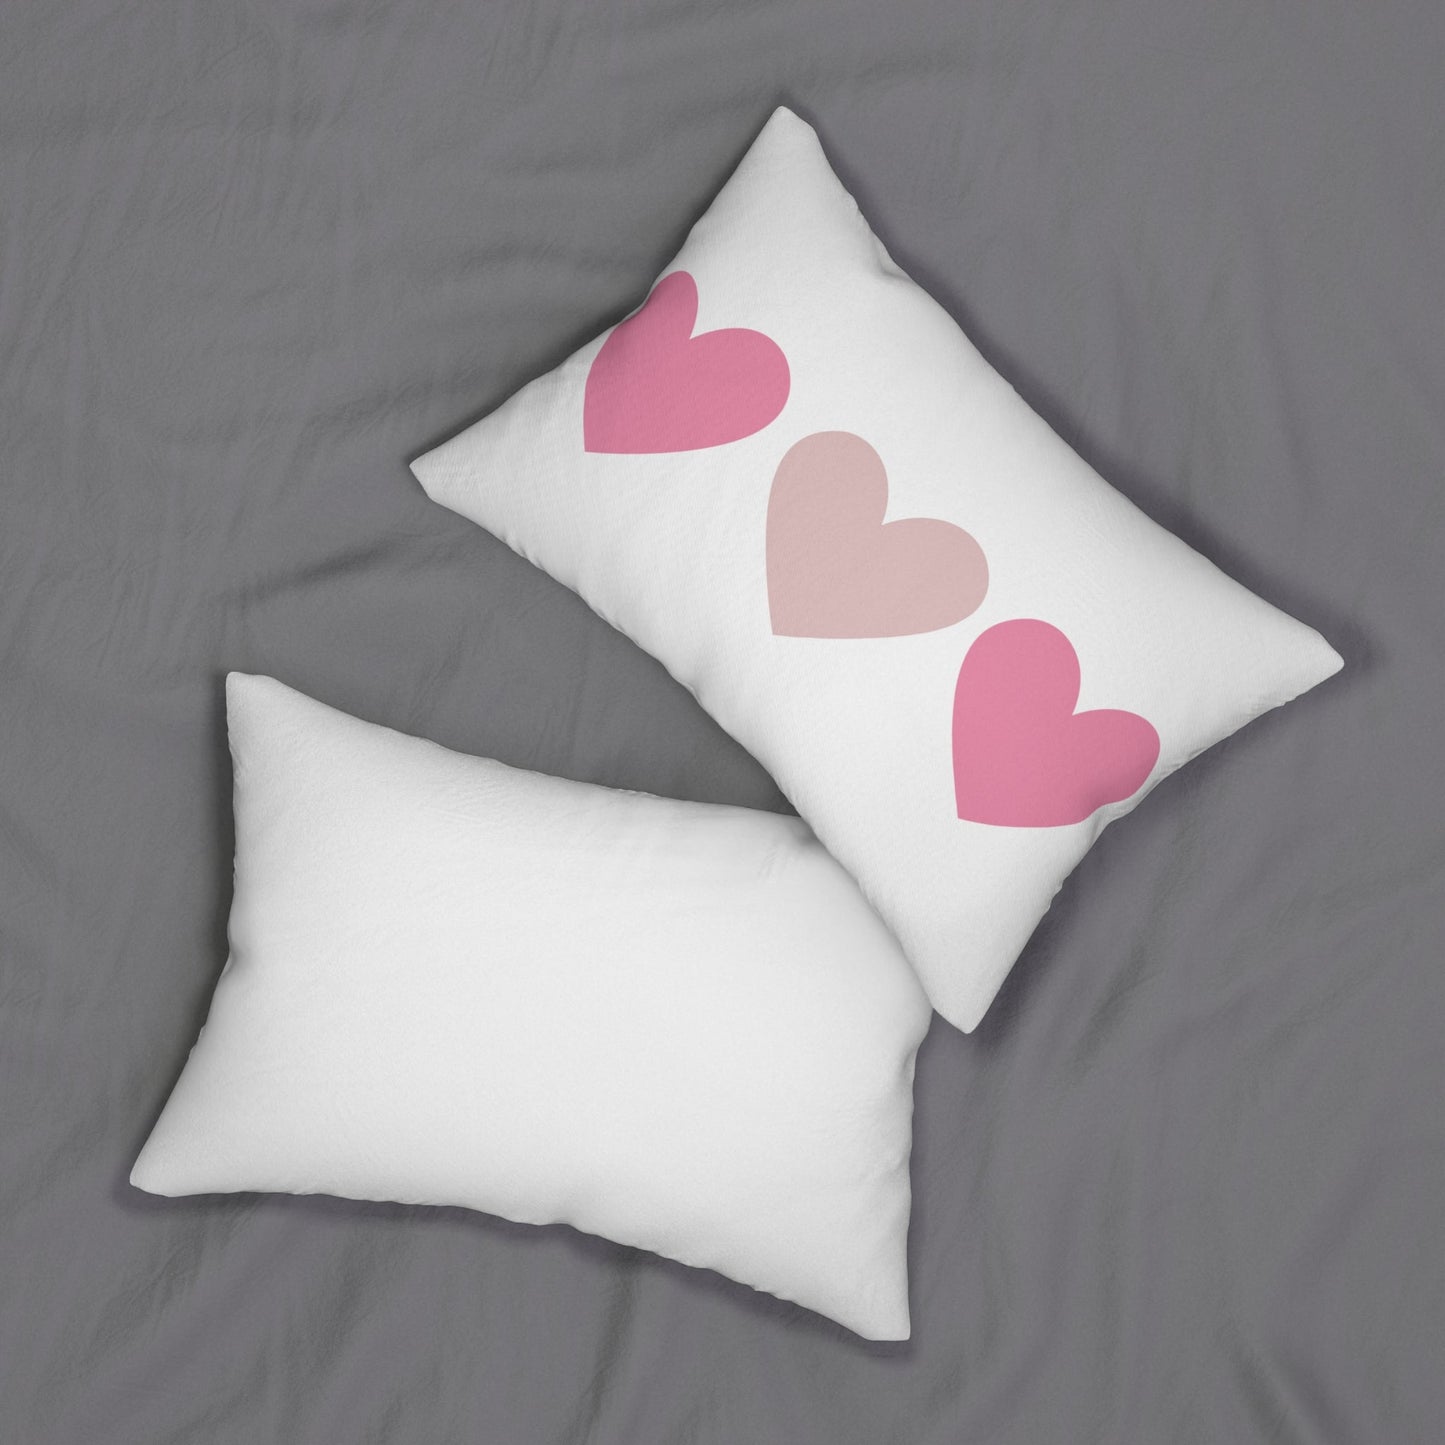 Get trendy with 3 Hearts Lumbar Pillow - Home Decor available at Good Gift Company. Grab yours for $28.95 today!